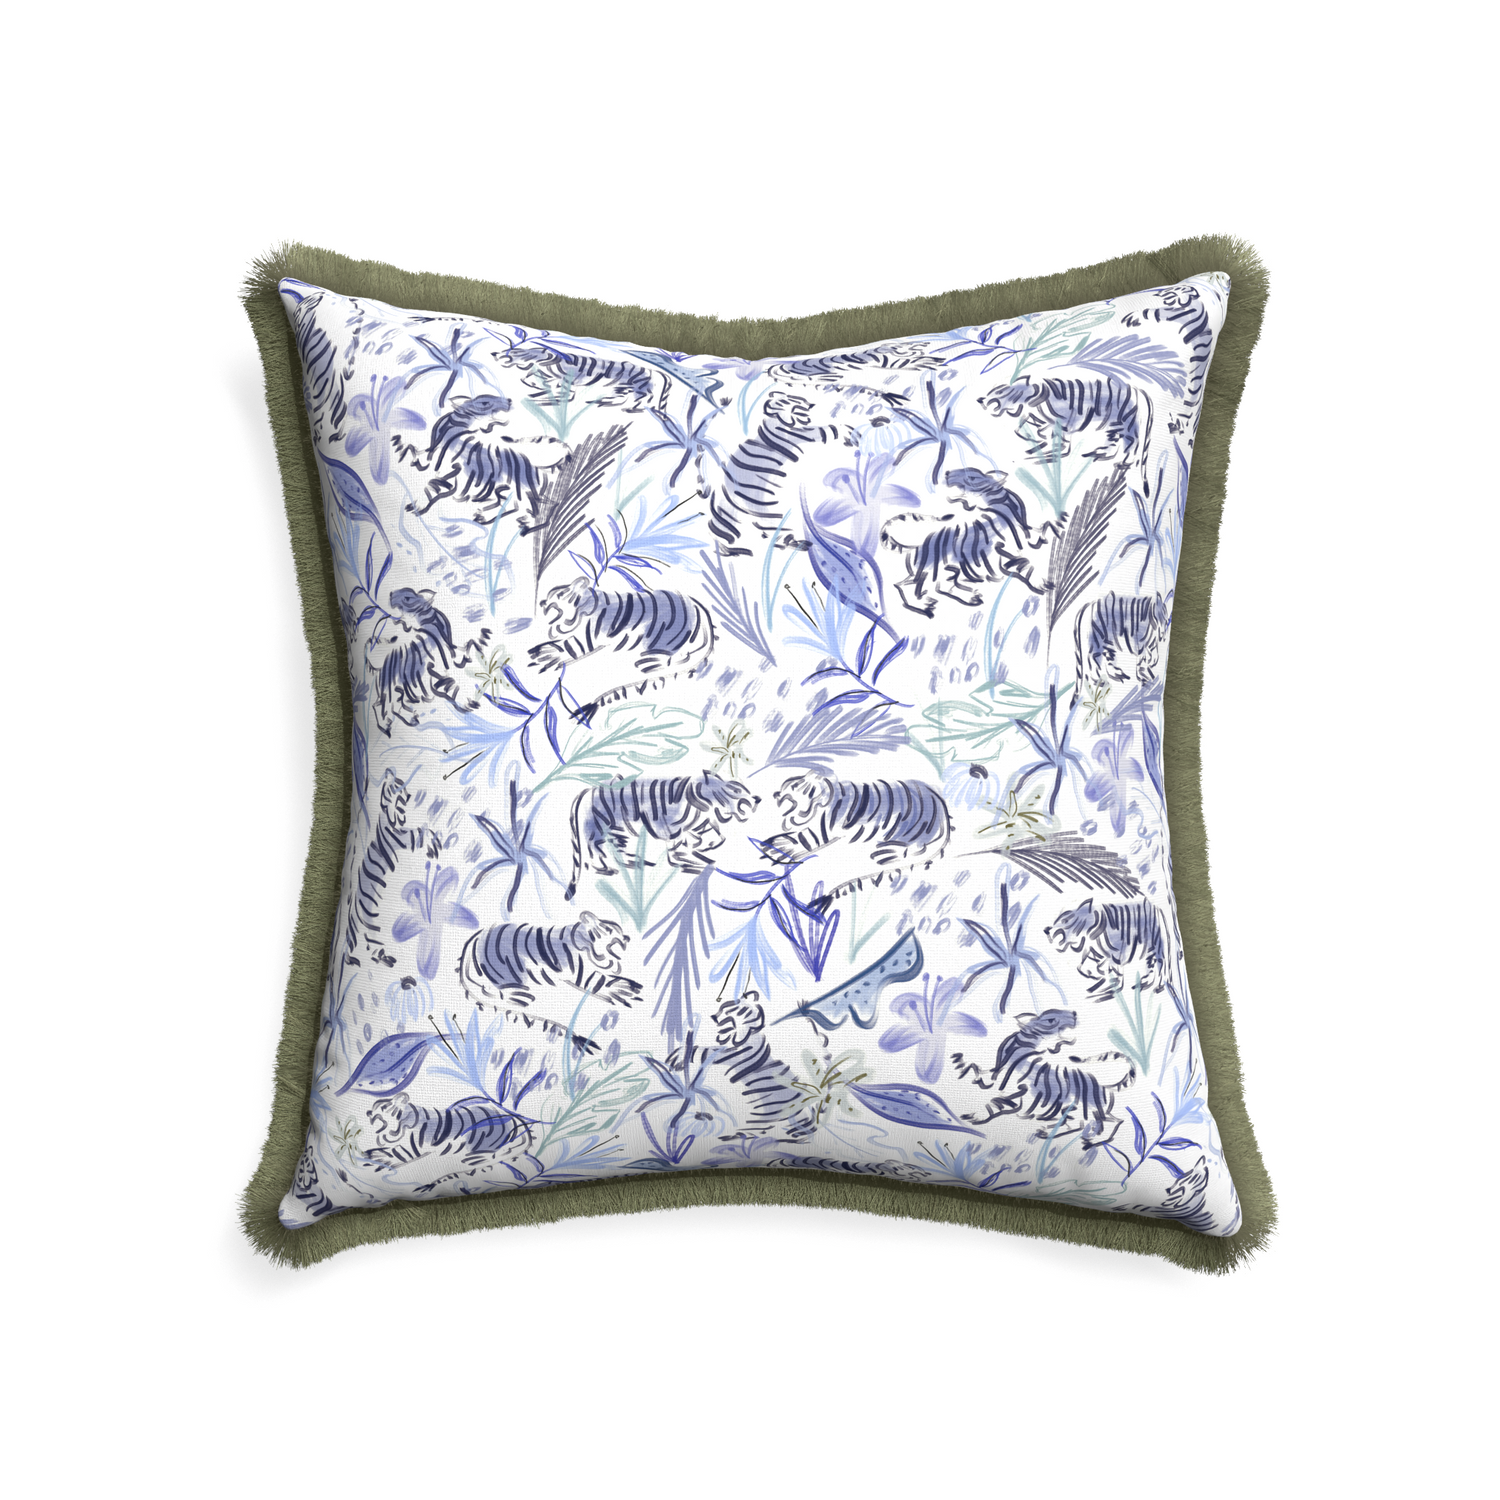 22-square frida blue custom blue with intricate tiger designpillow with sage fringe on white background